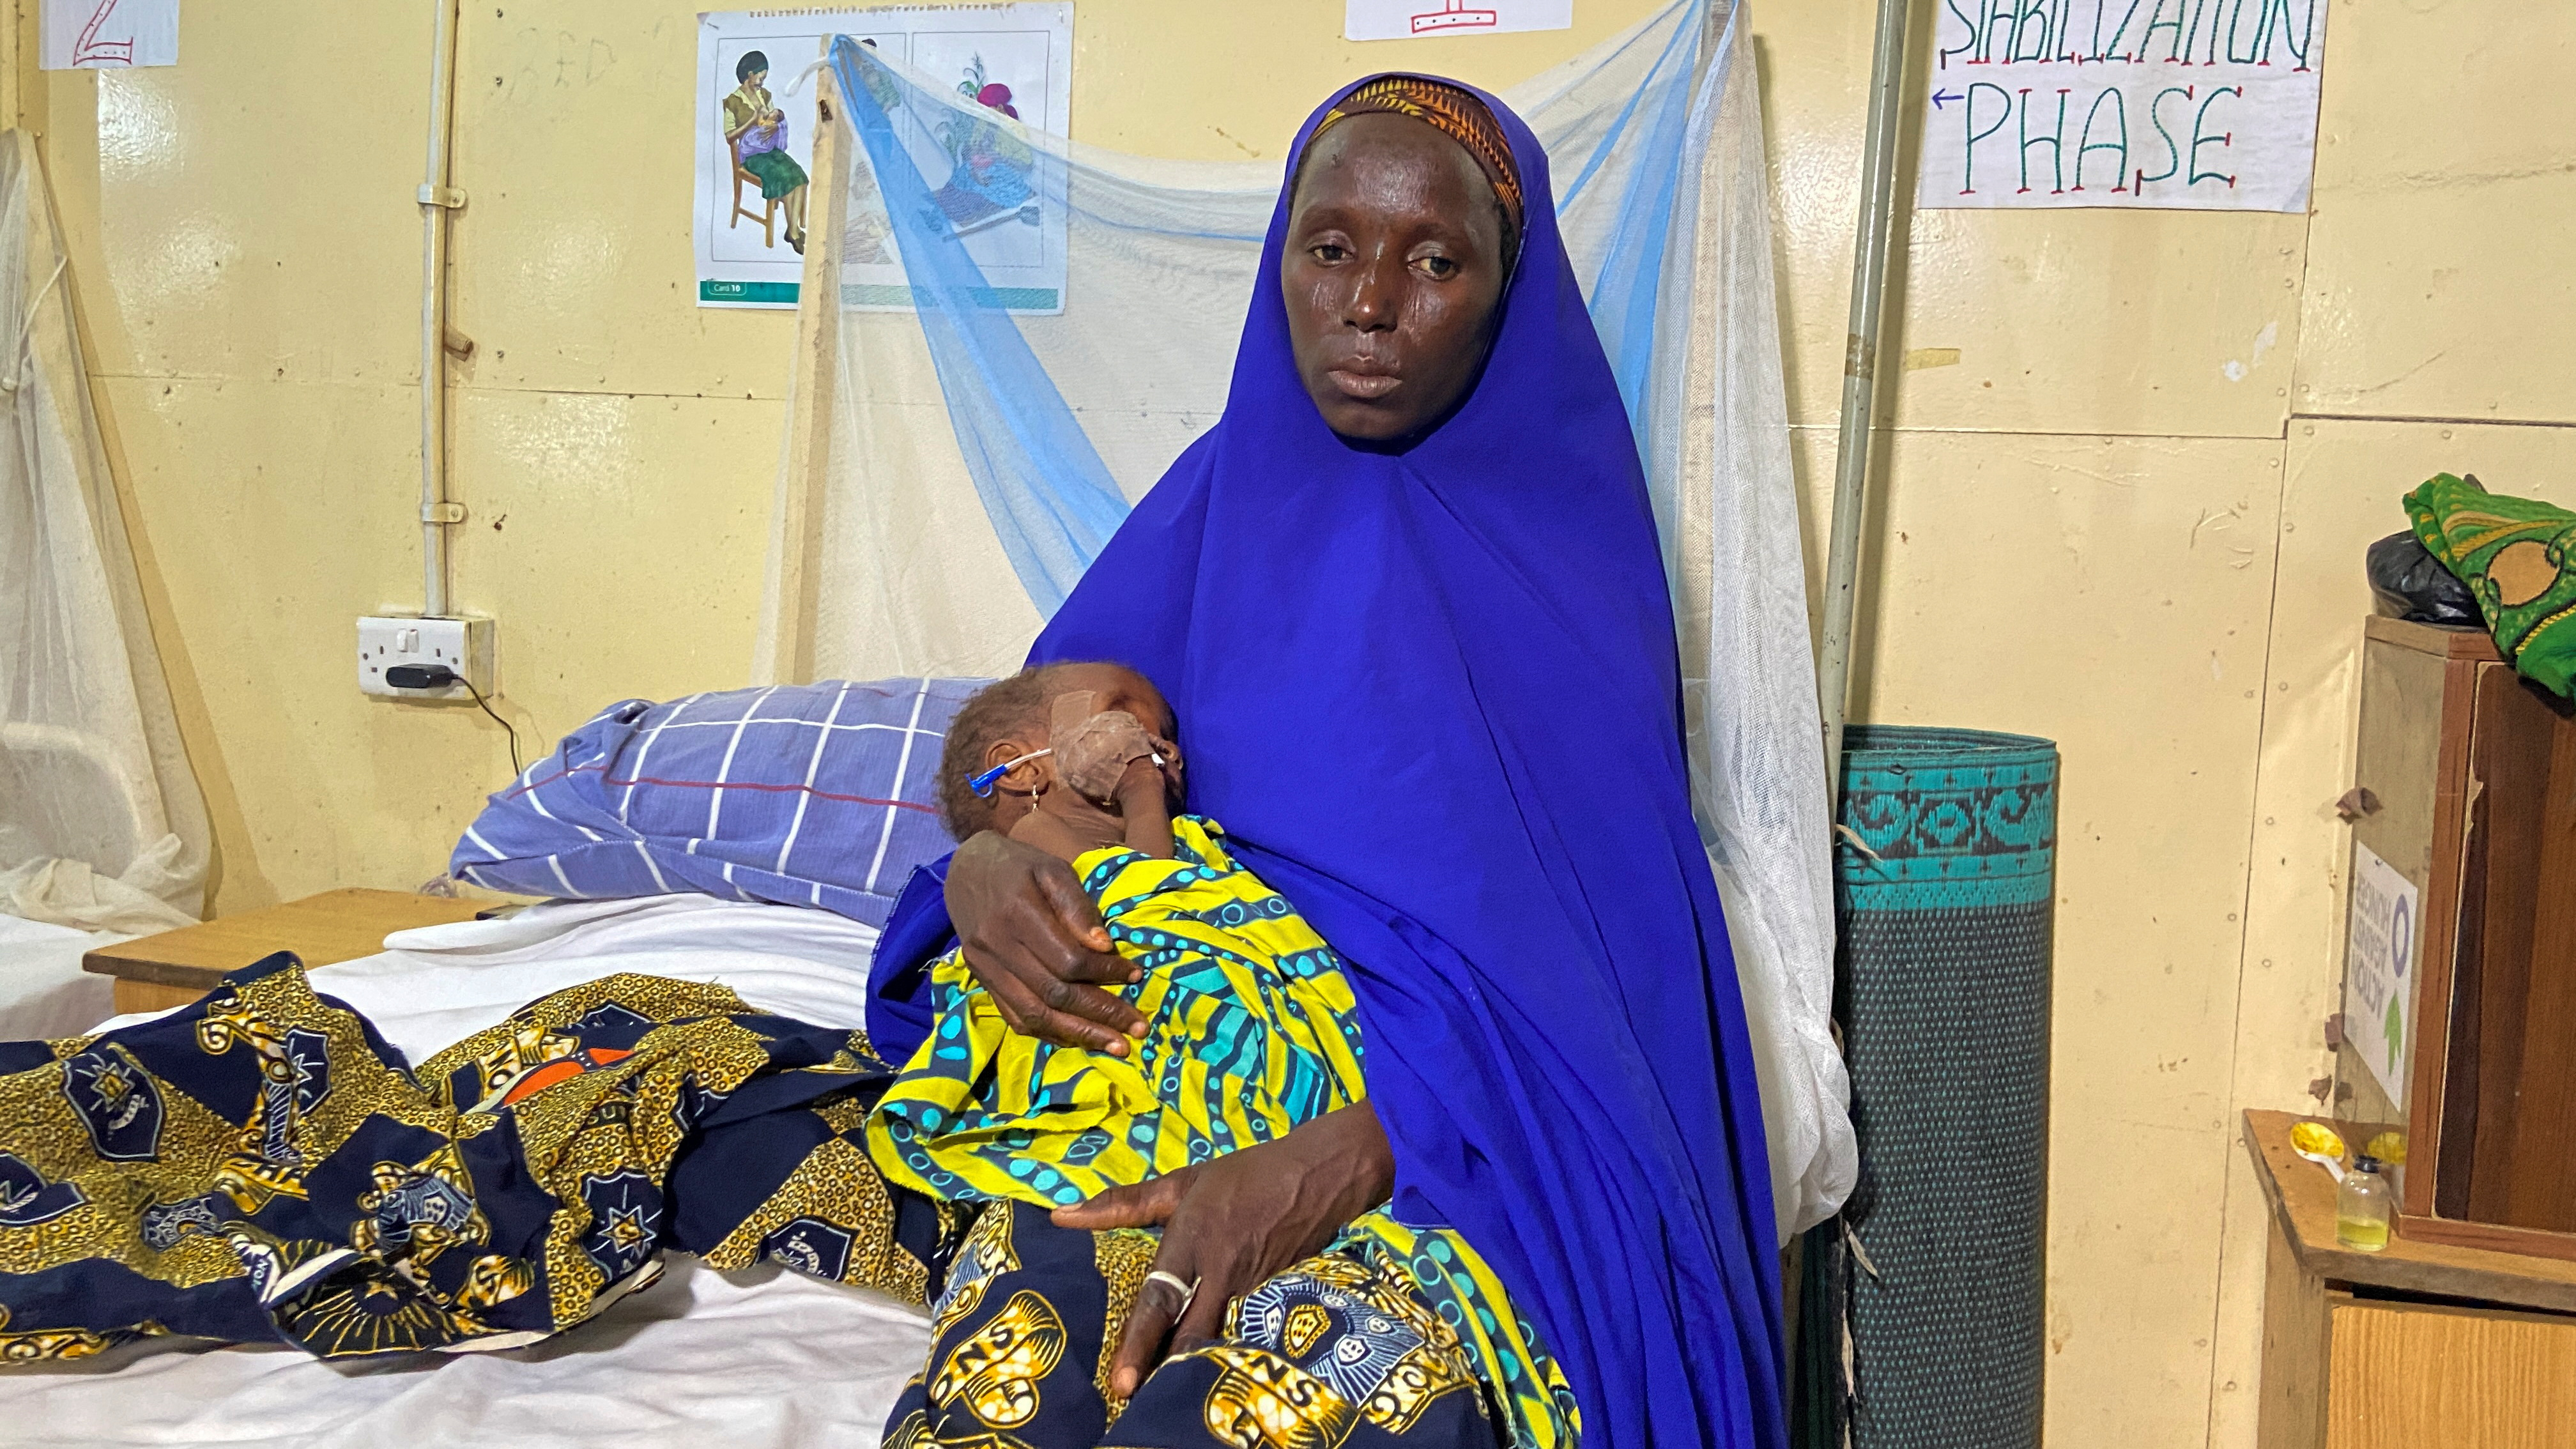 Fatima Usman carries her child, Aisha, as she sits on a bed in a treatment center for severely malnourished children in Damaturu, Yobe